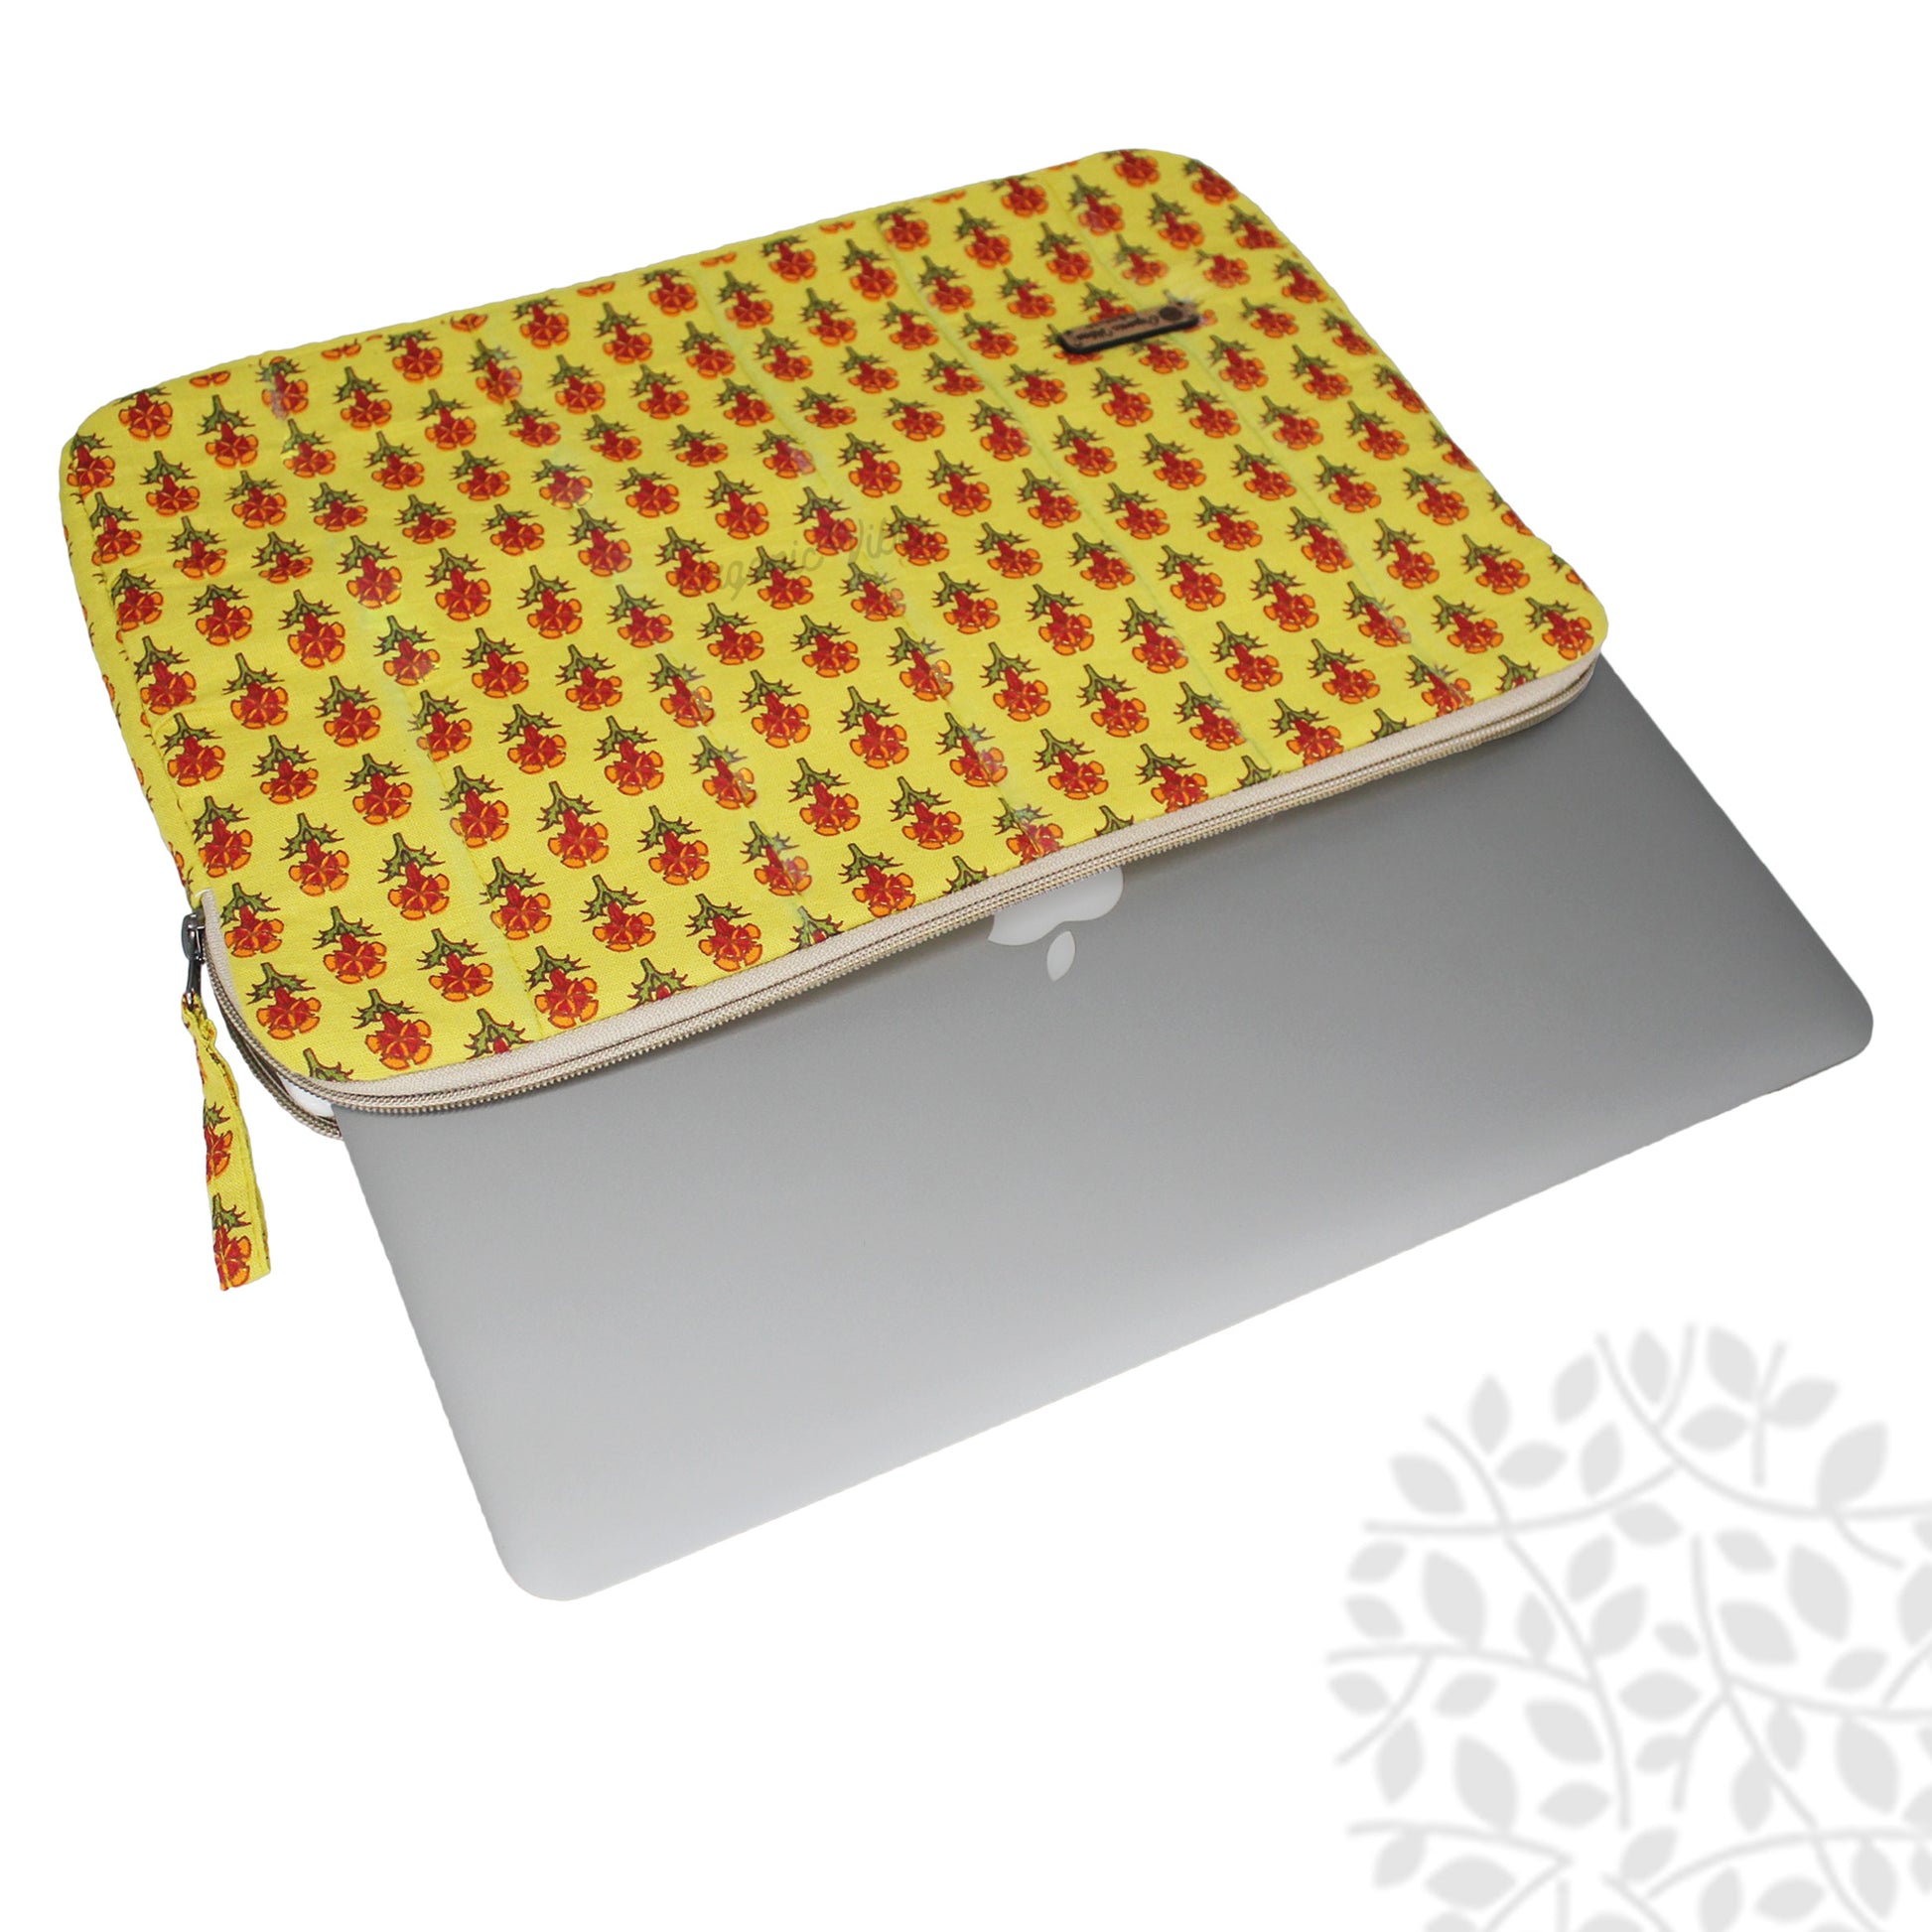 Organic Vibes Hand Block Printed Floral Yellow Laptop Sleeves for 13 Inches Laptop